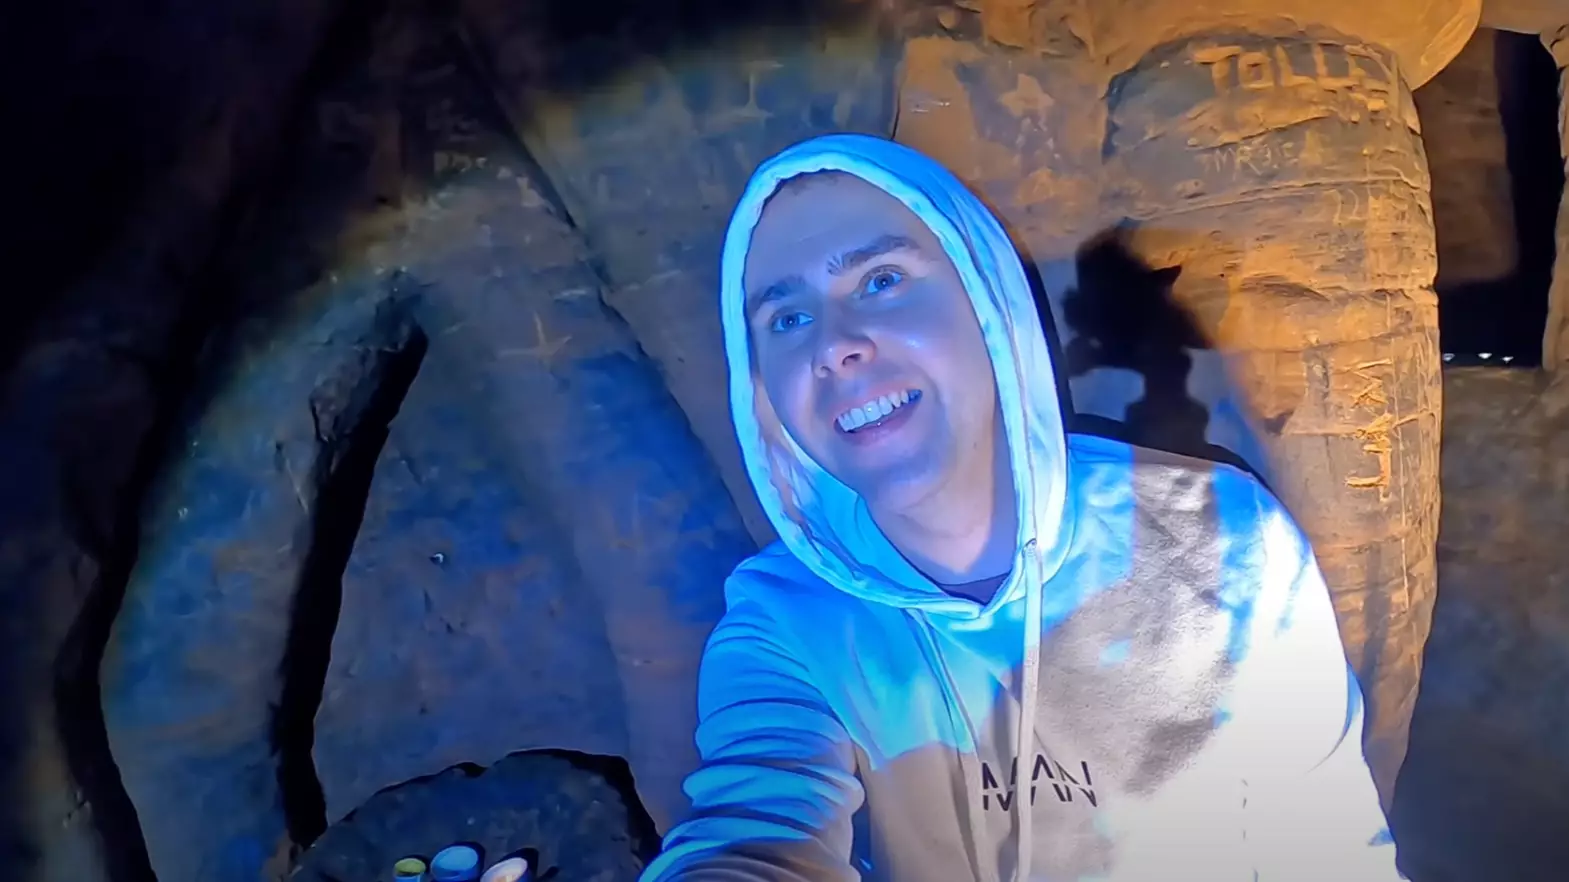 YouTuber Claims He’s Found Secret 'Knights Templar' Caves In Woods